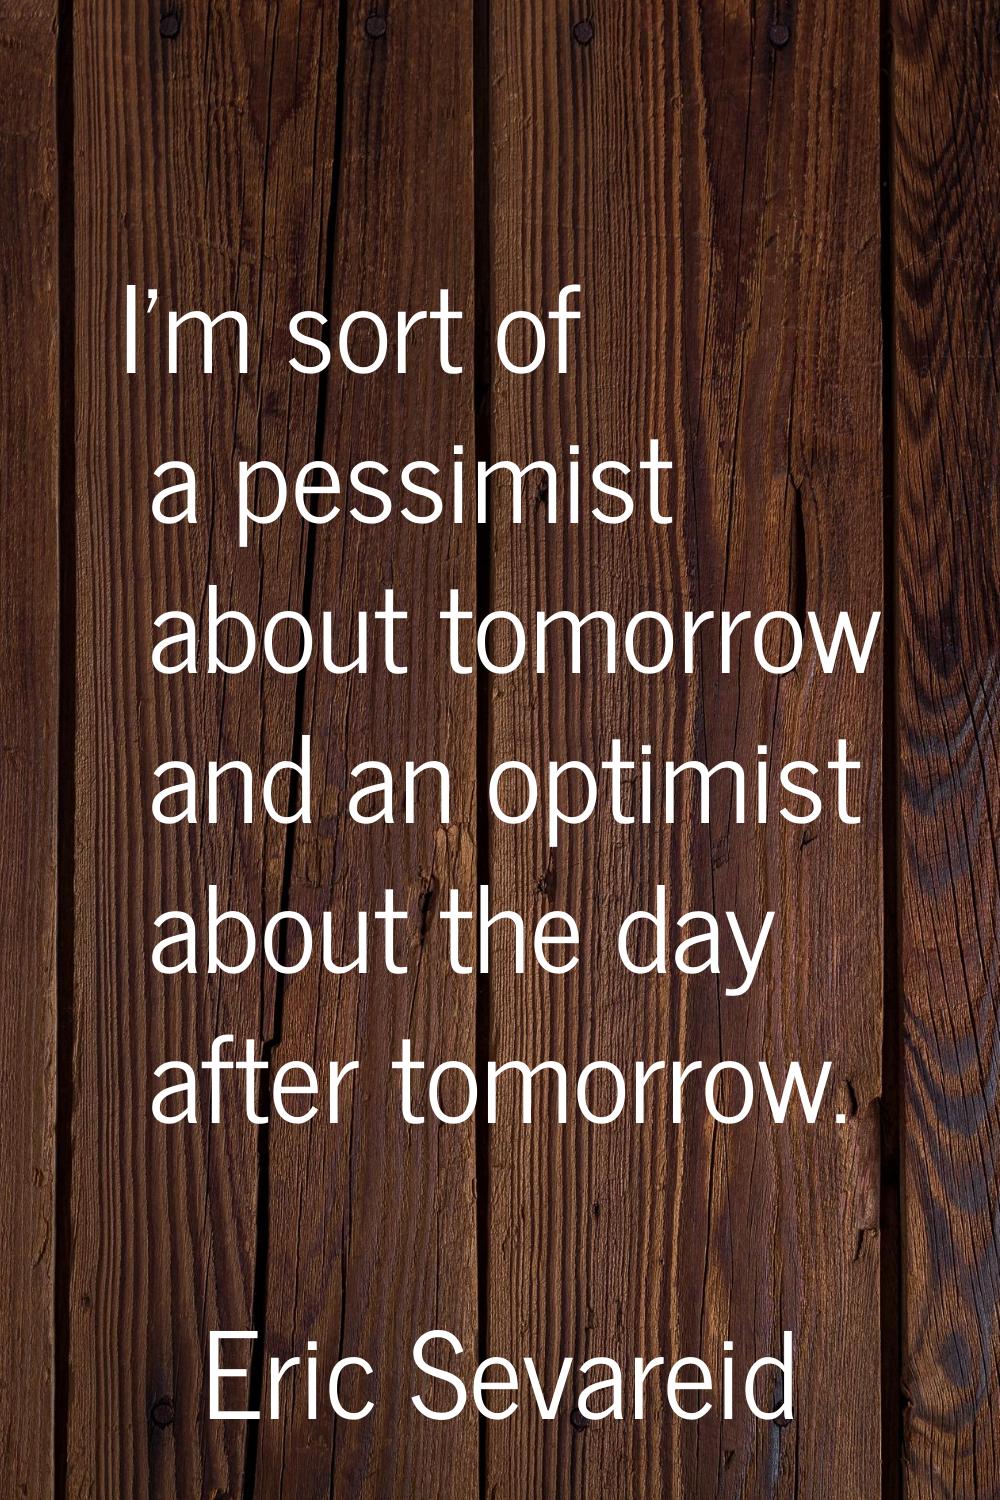 I'm sort of a pessimist about tomorrow and an optimist about the day after tomorrow.